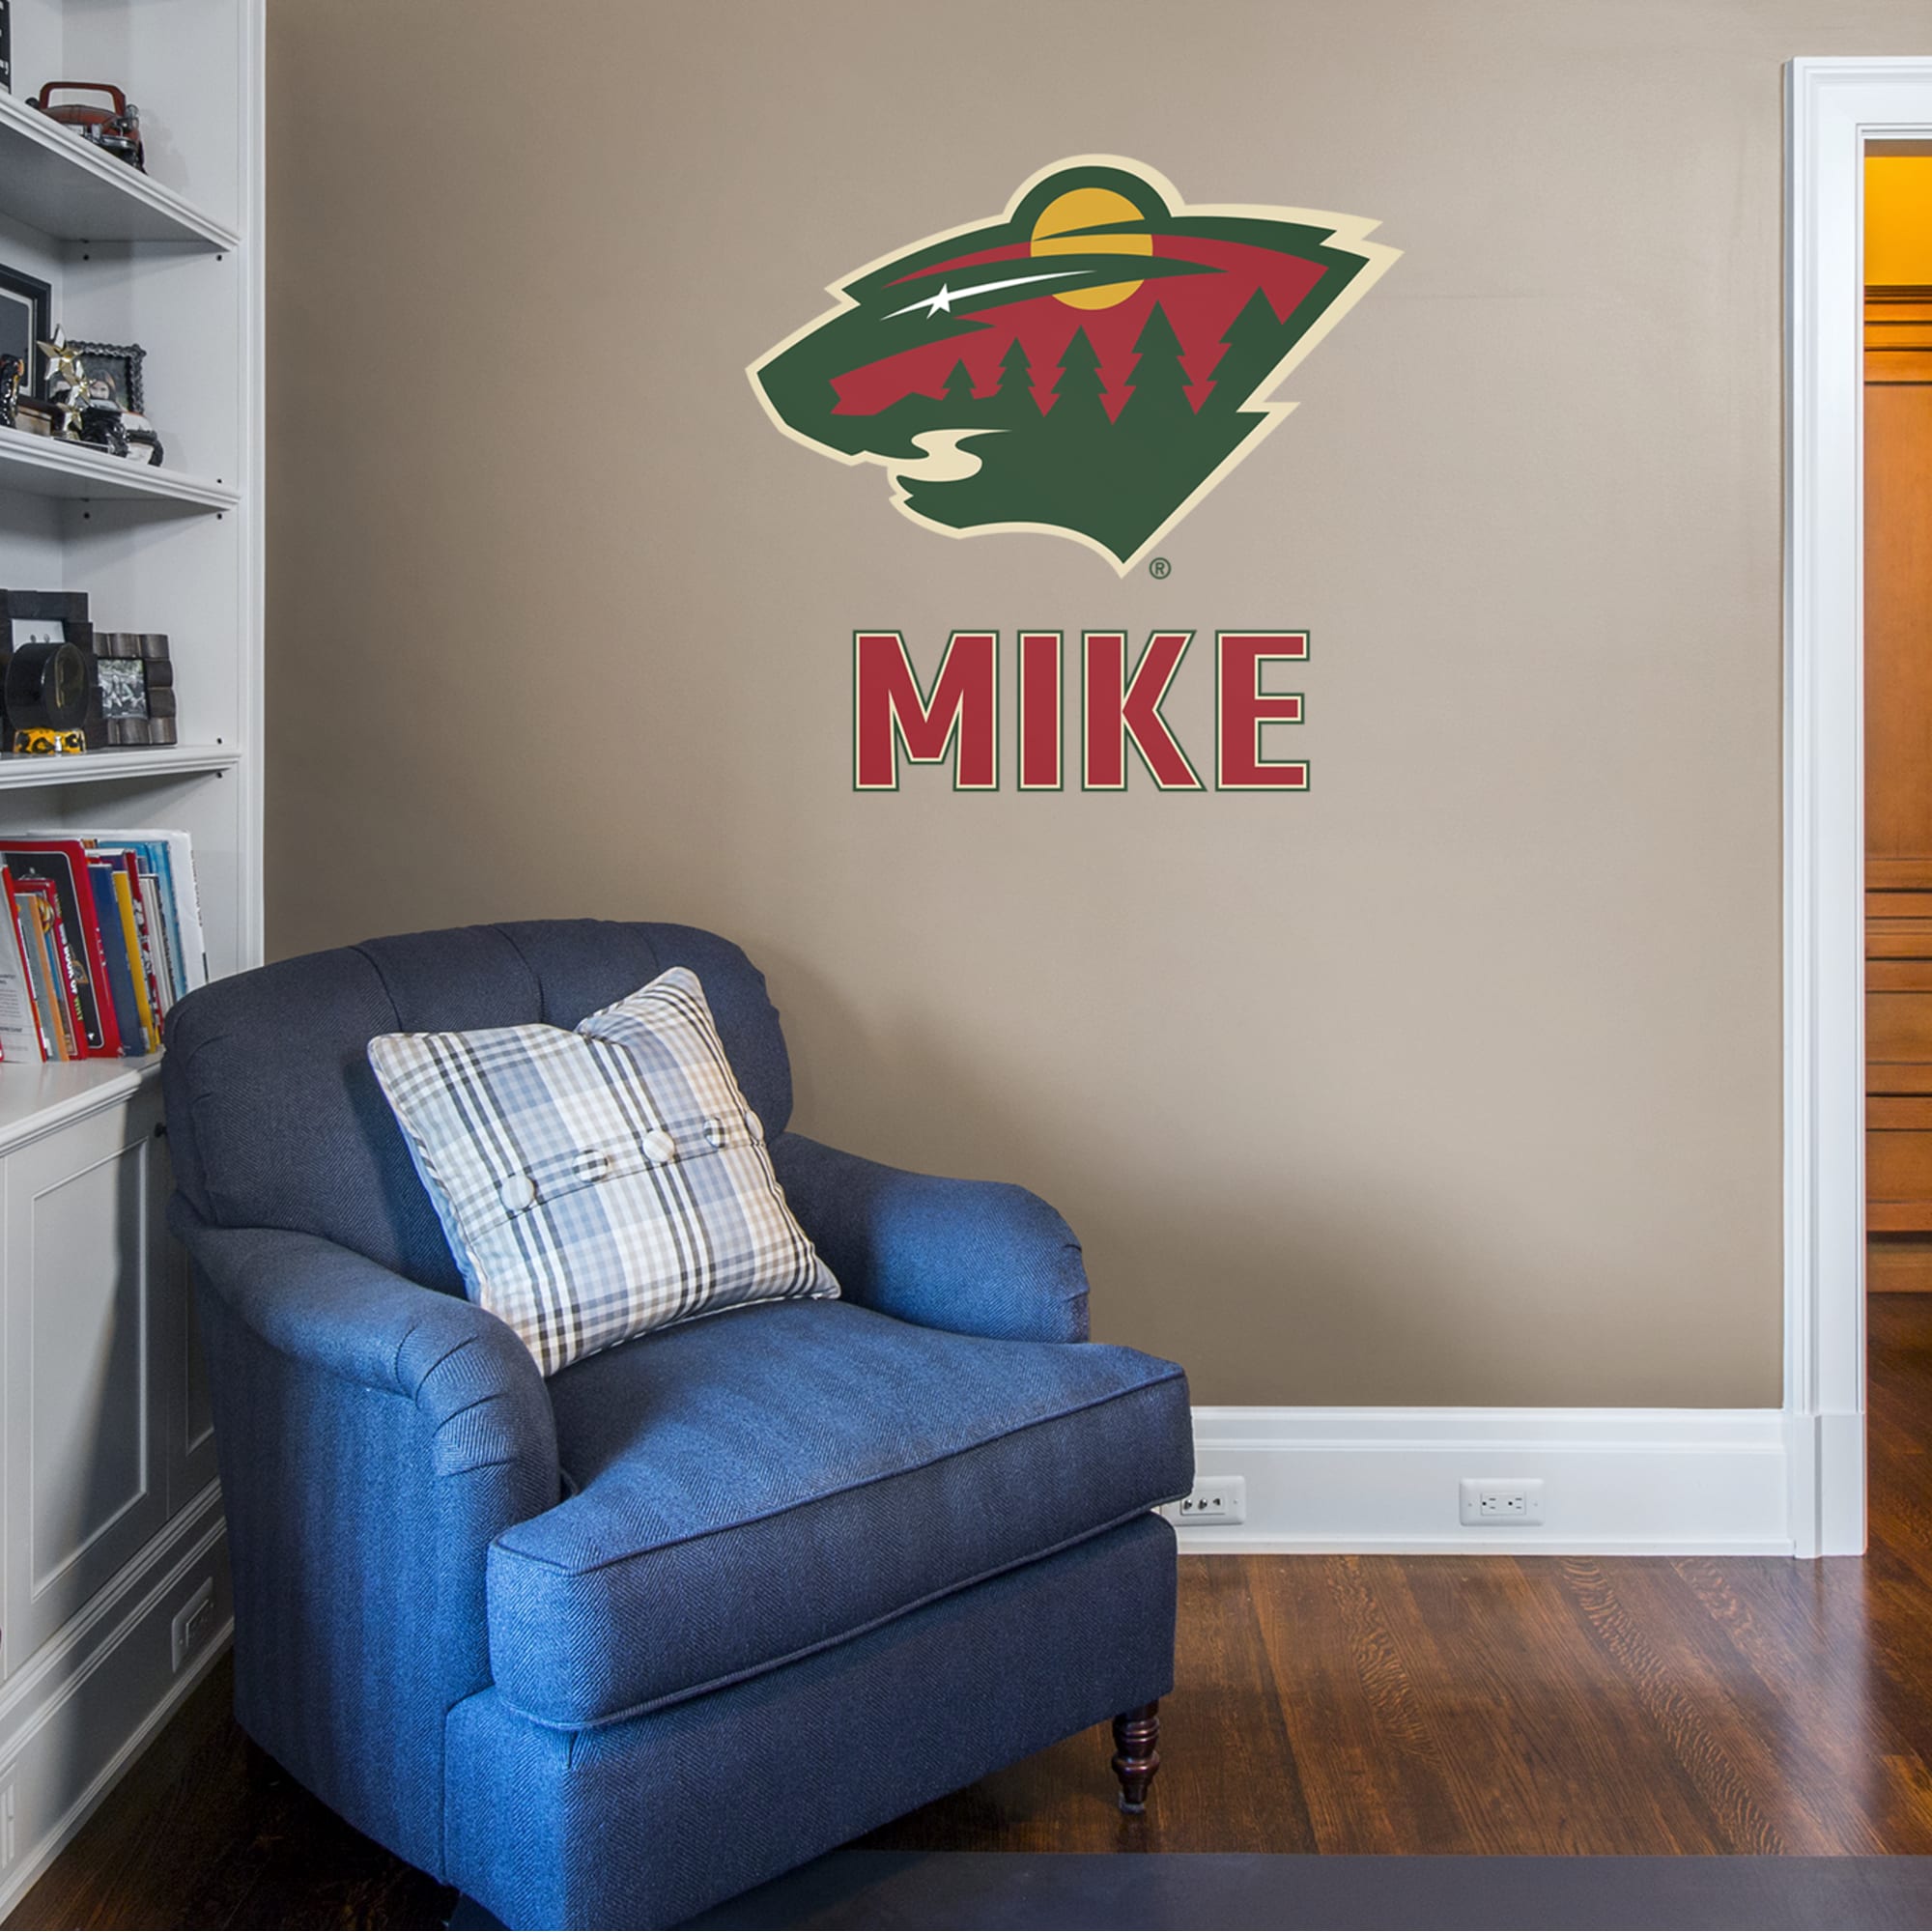 Minnesota Wild: Stacked Personalized Name - Officially Licensed NHL Transfer Decal in Red (39.5"W x 52"H) by Fathead | Vinyl